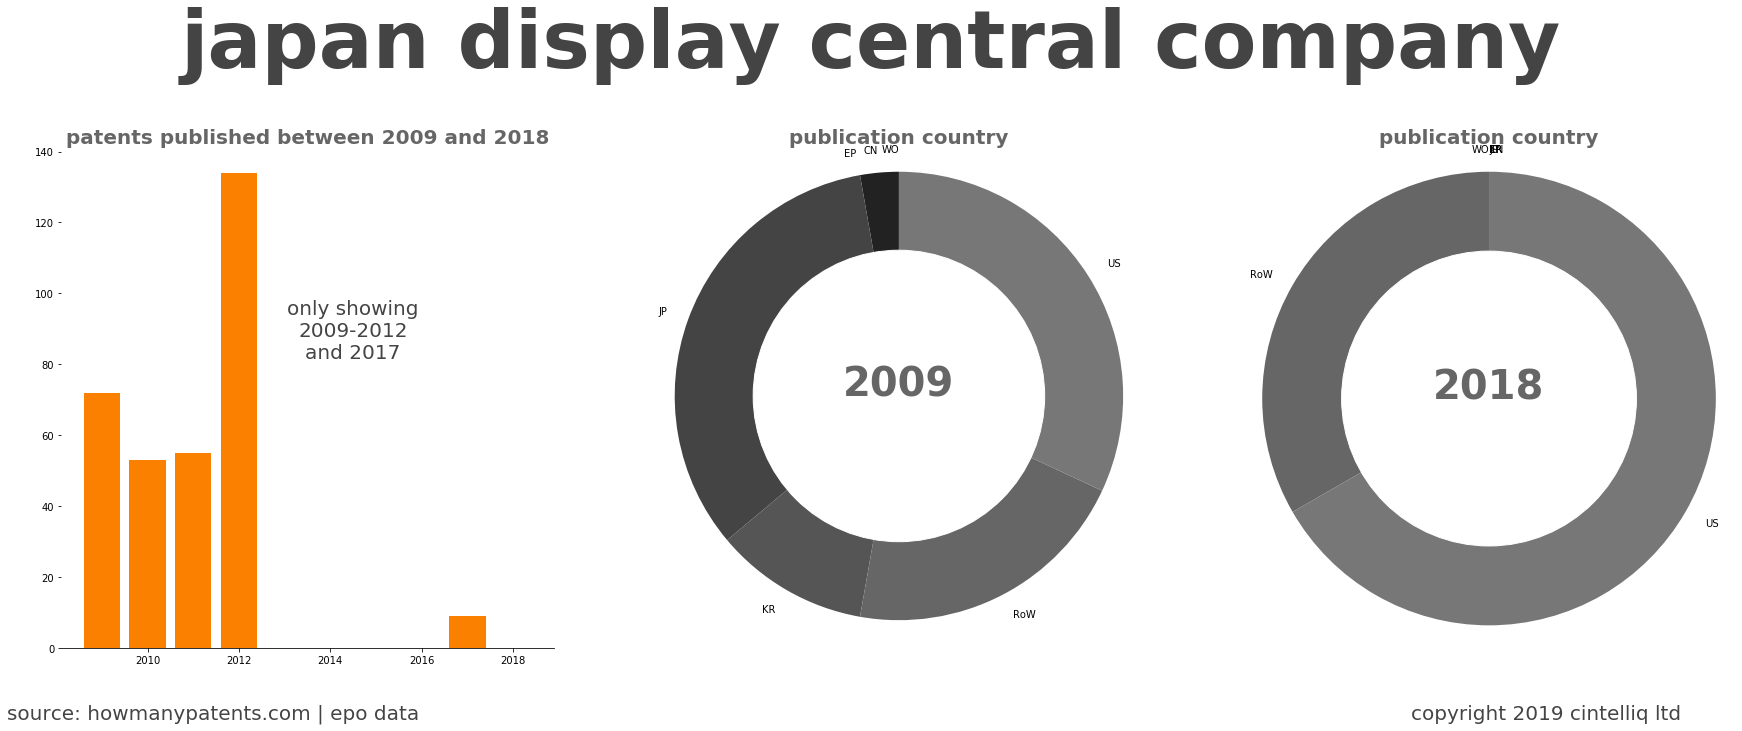 summary of patents for Japan Display Central Company